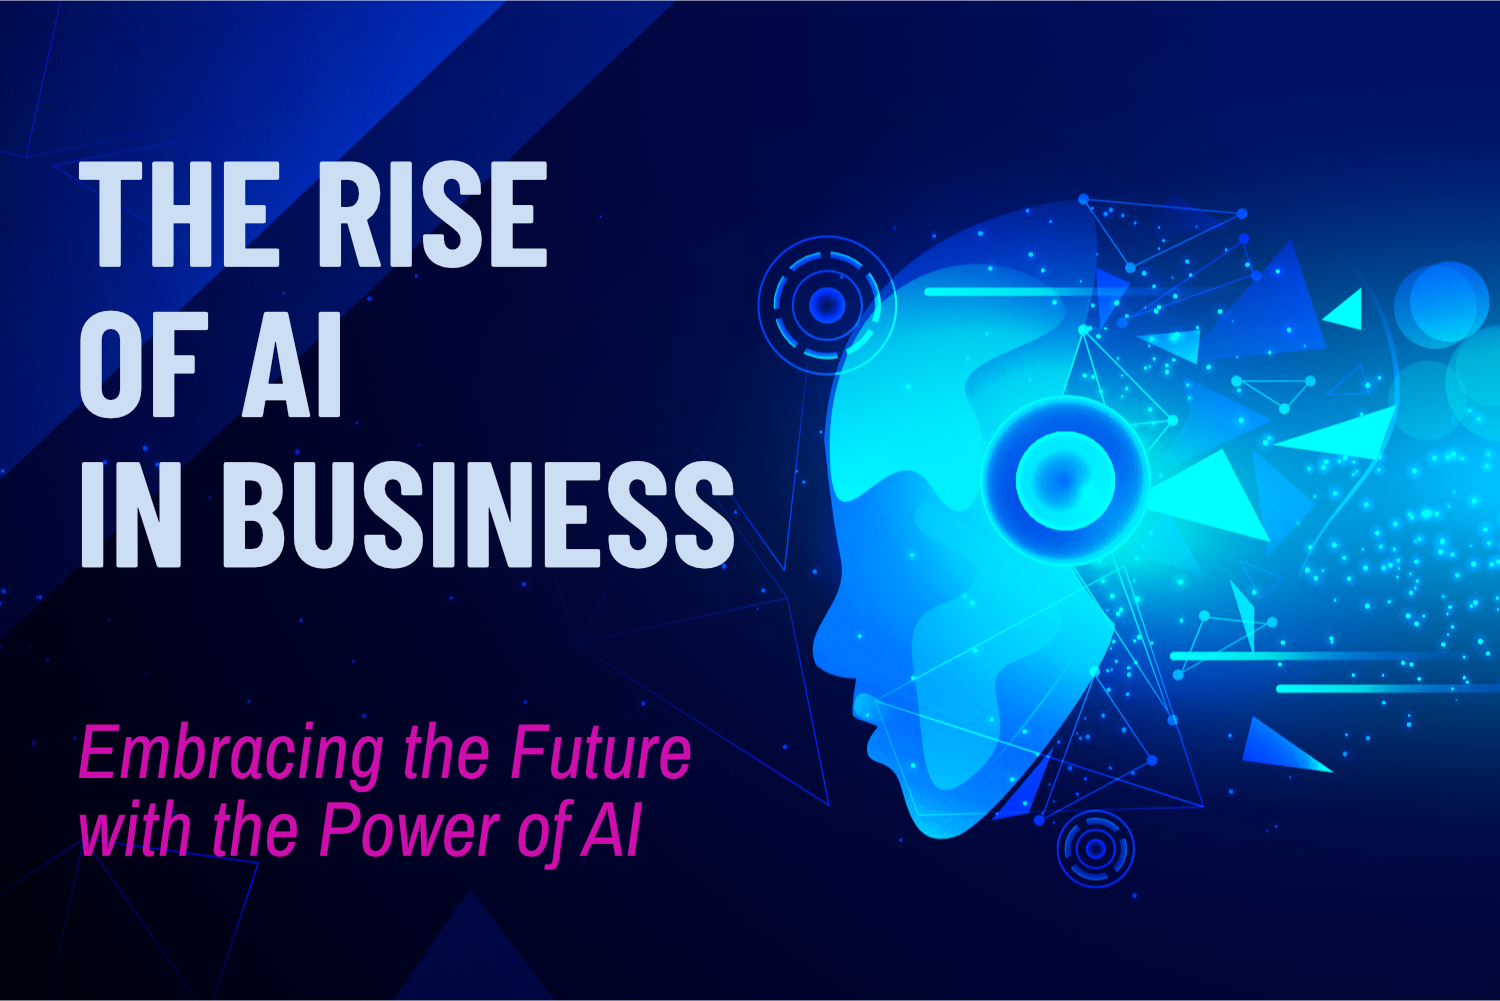 The Rise of AI in Business